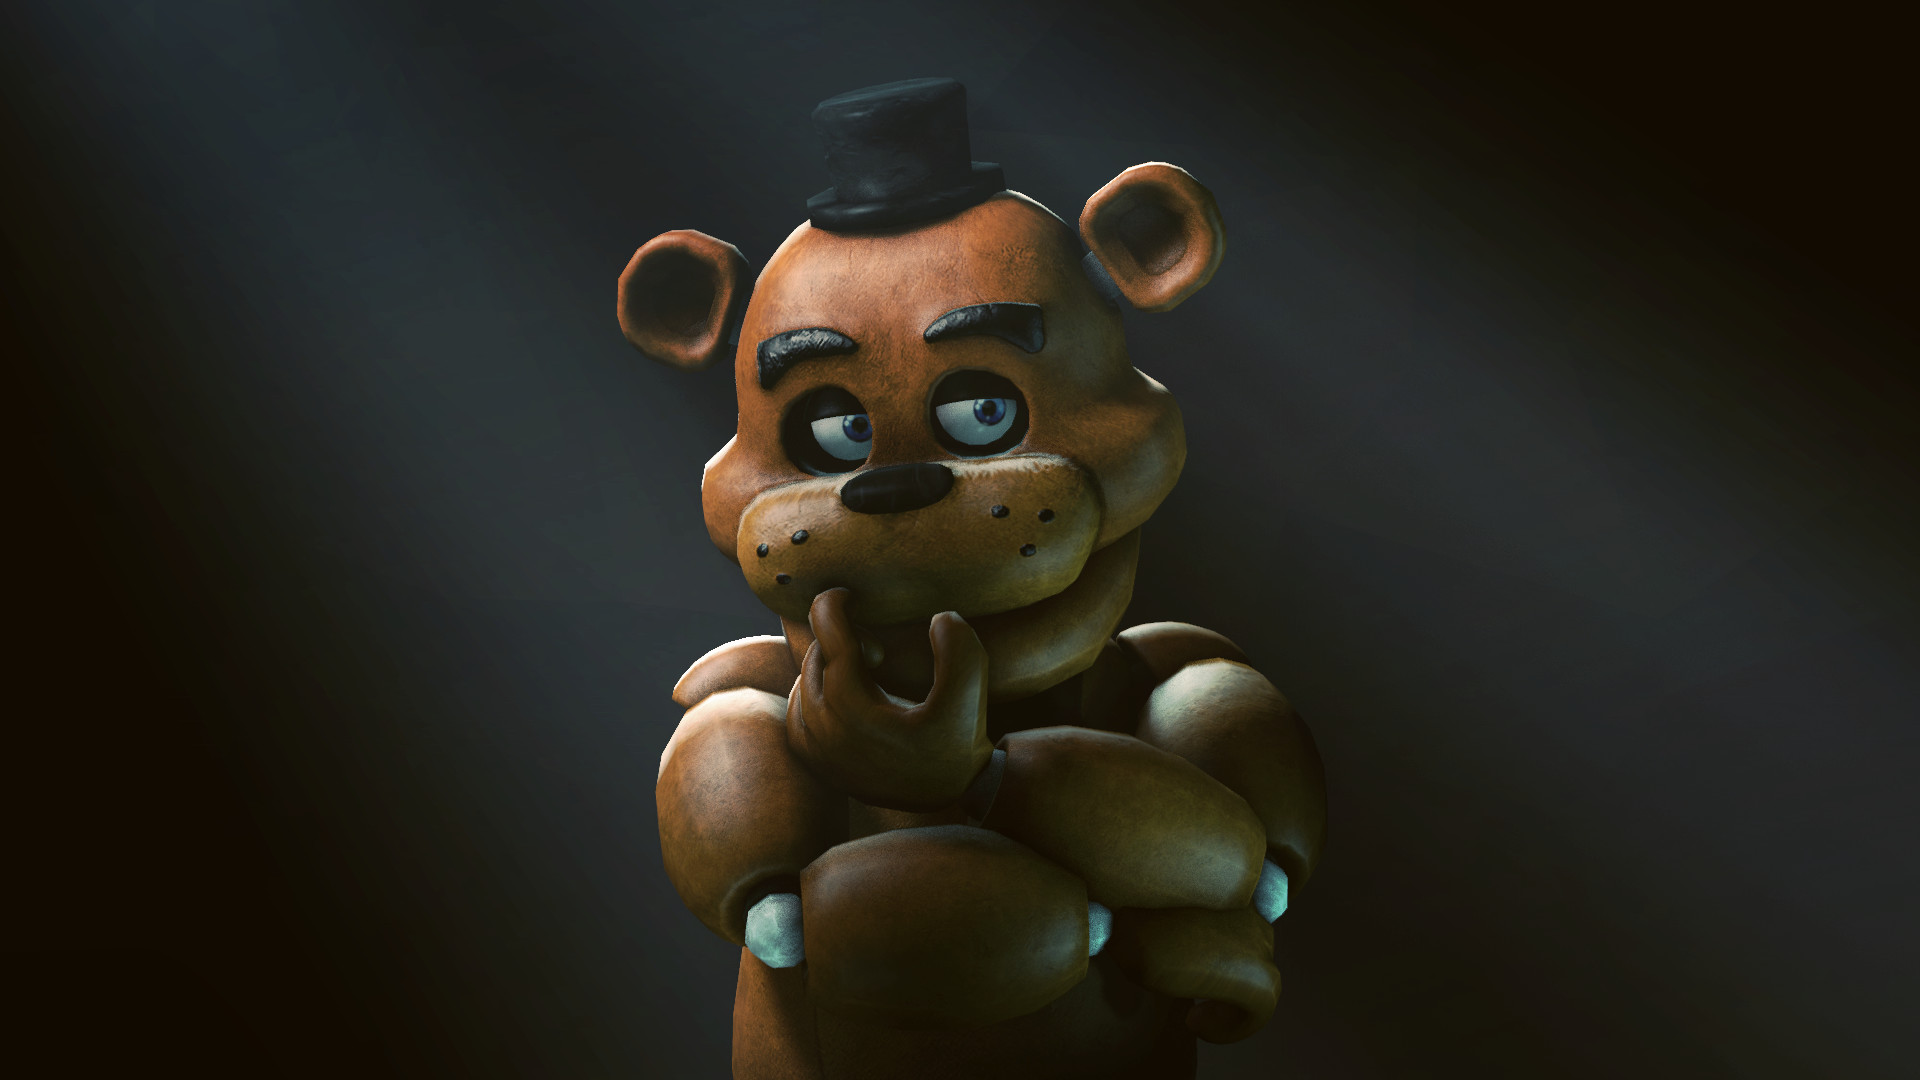 170 best five nights at freddys images on Pinterest Freddy s, Freddy fazbear and Image